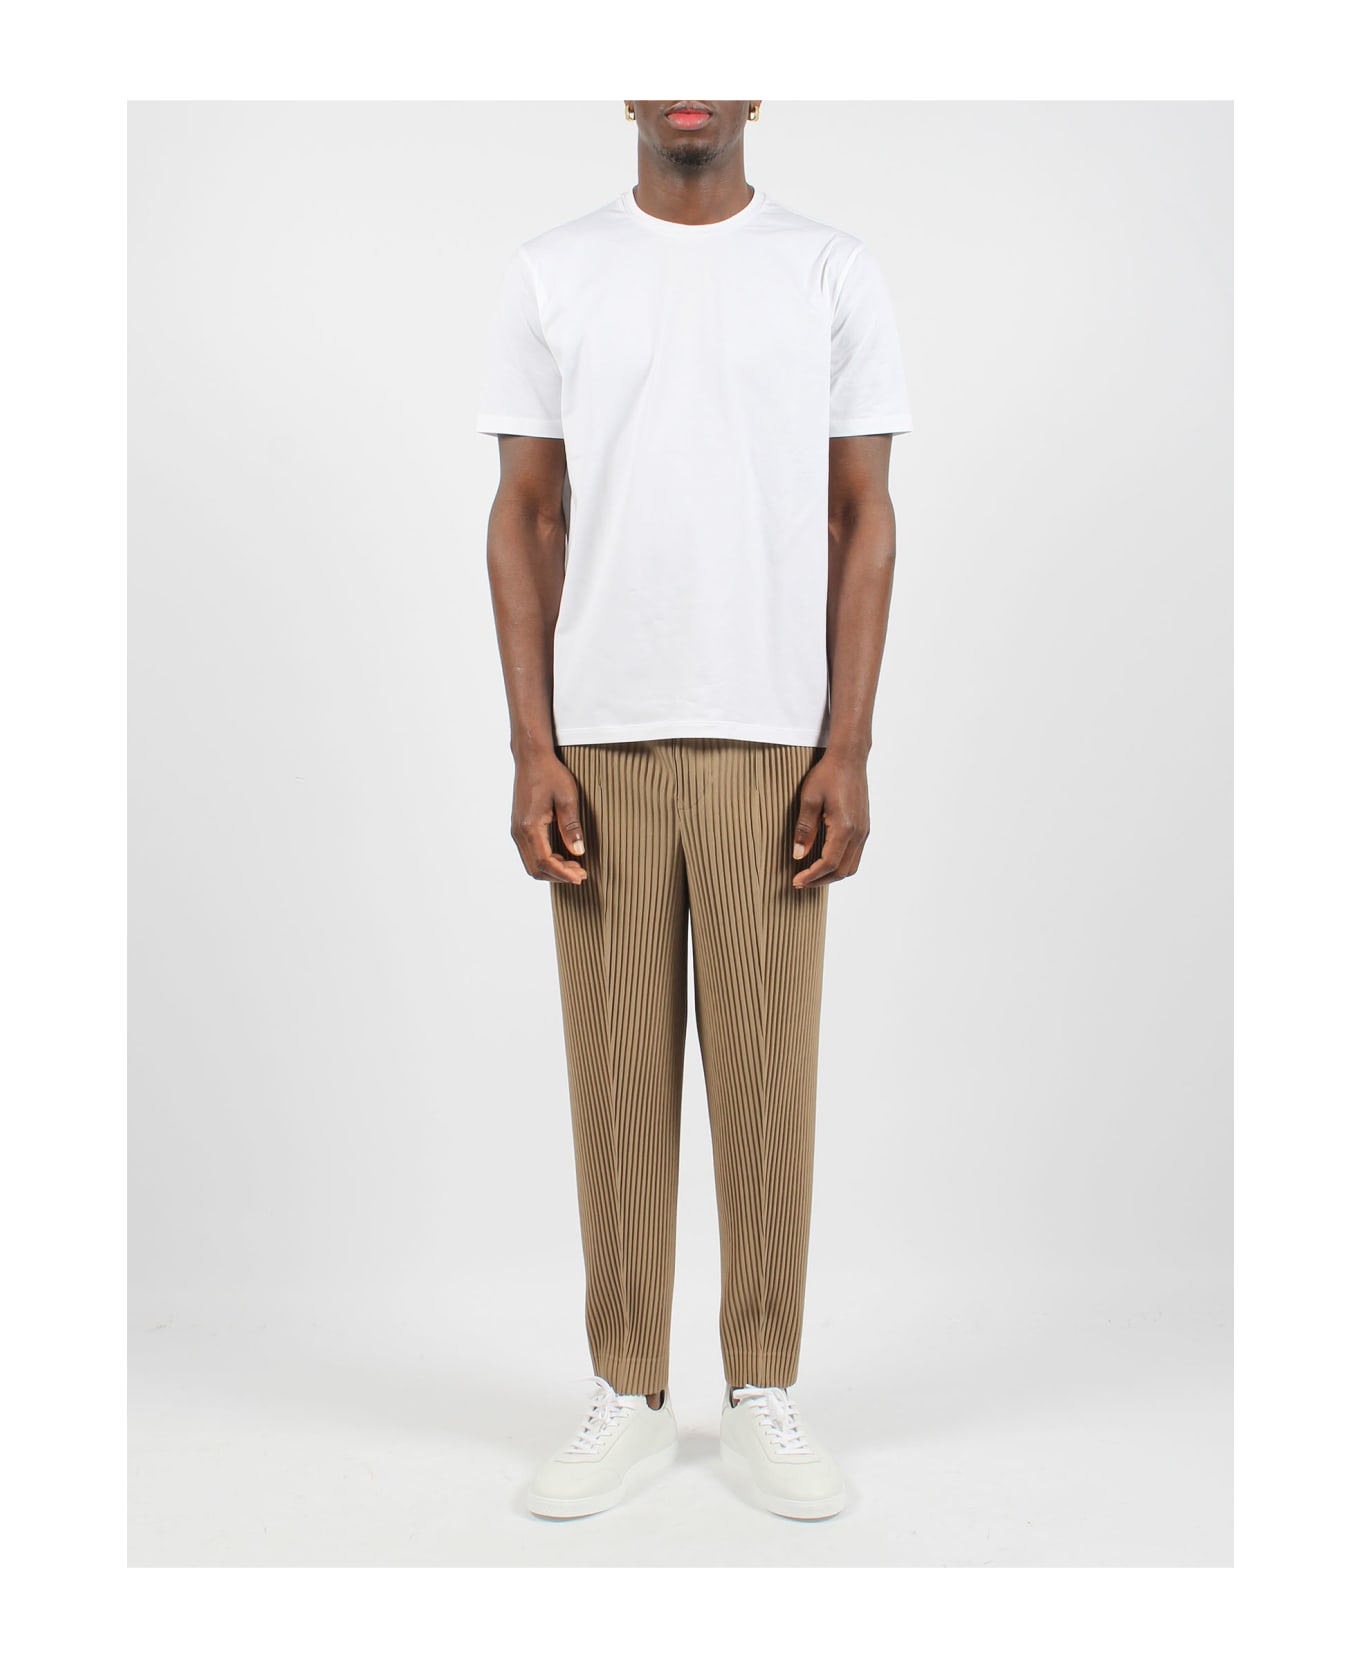 Homme Plissé Issey Miyake Compleat Trousers - Brown